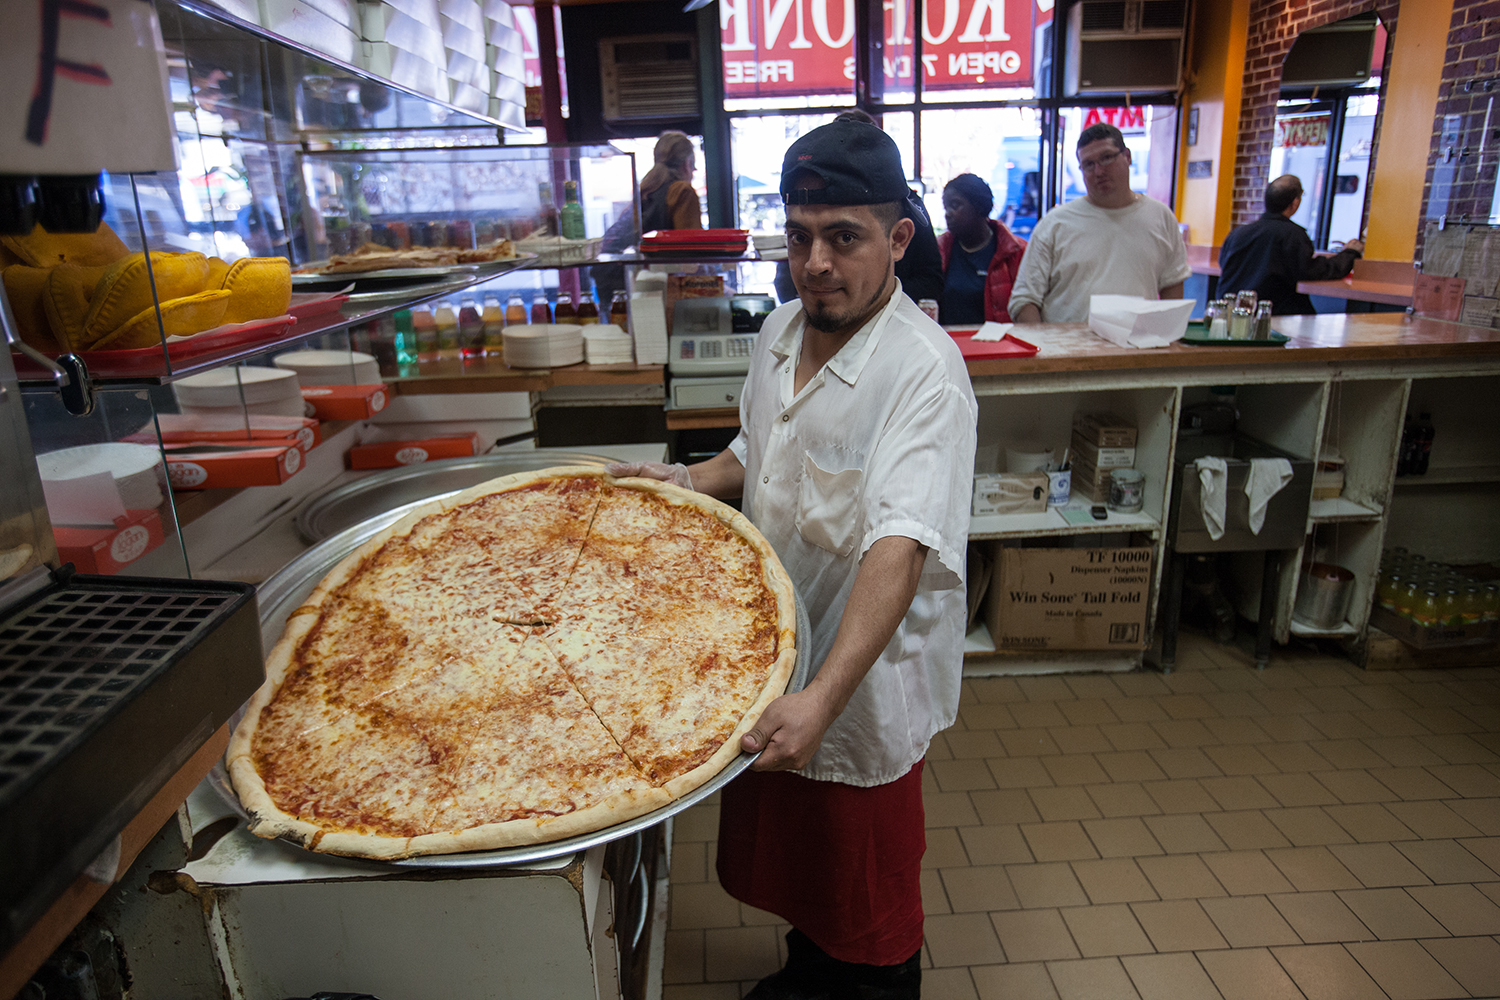  Five years after opening in 1981, Koronet upped the diameter of its pies from 26" to 32". 